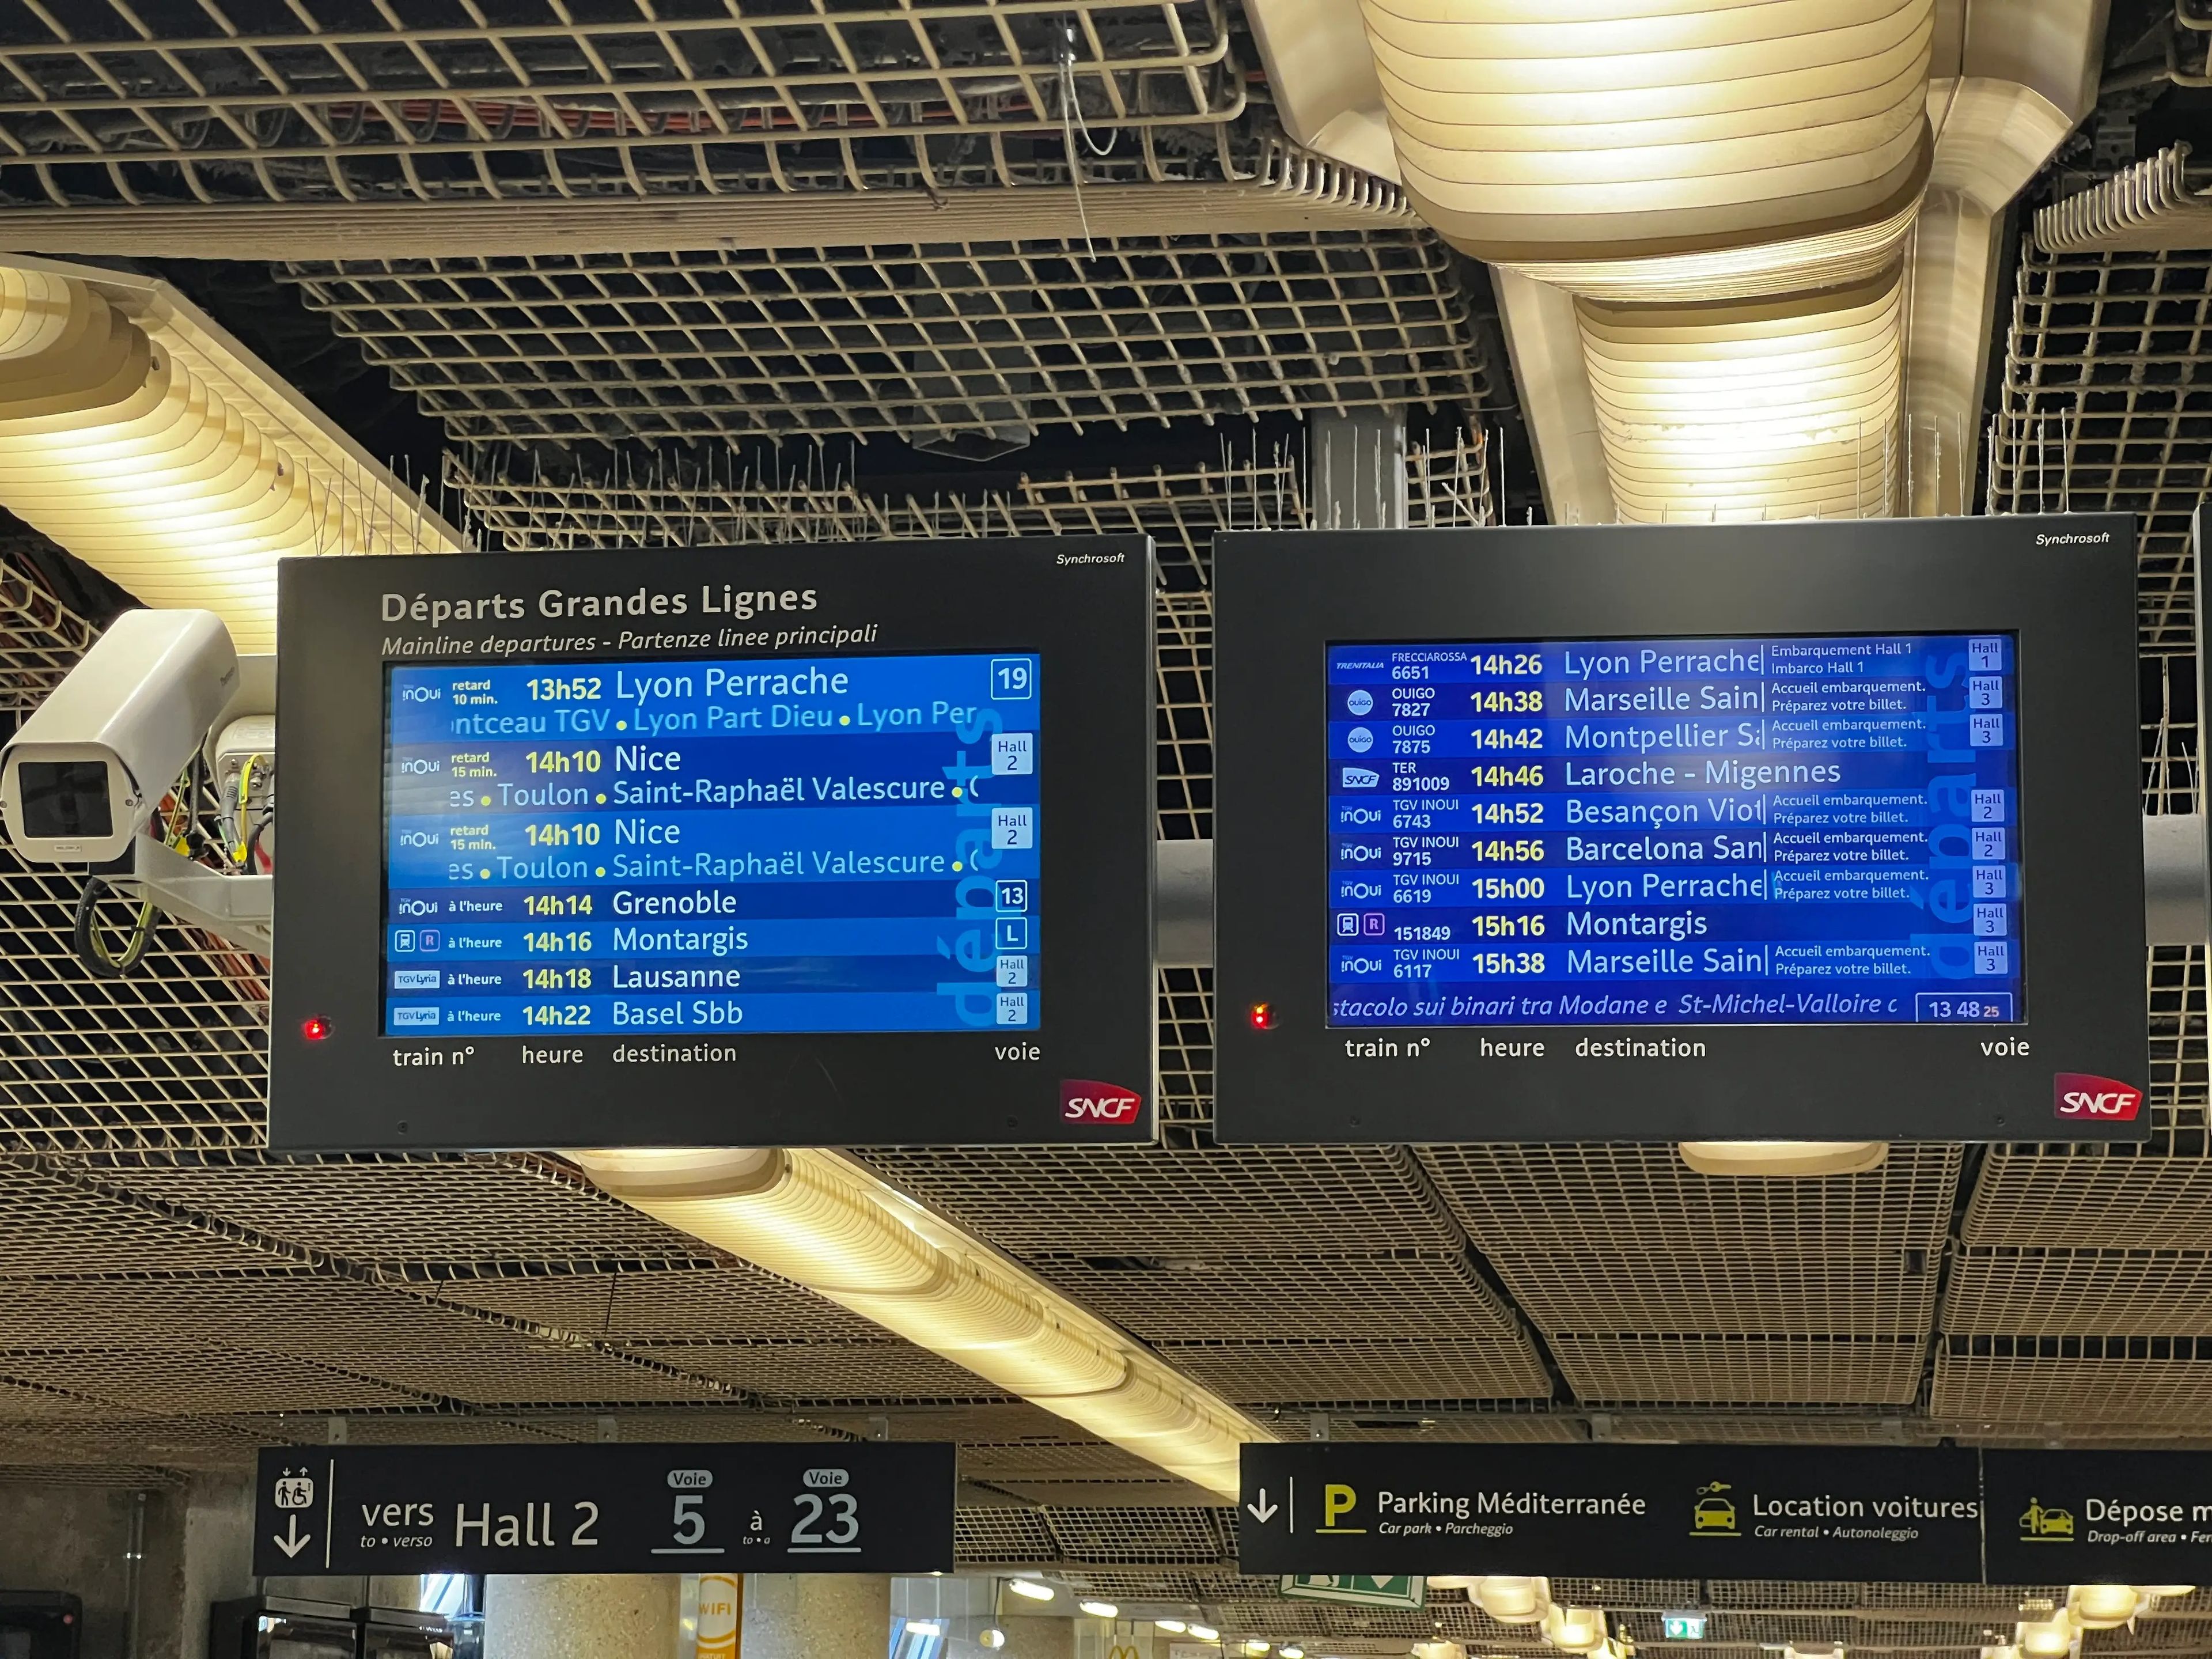 Departure boards in a Paris train station.